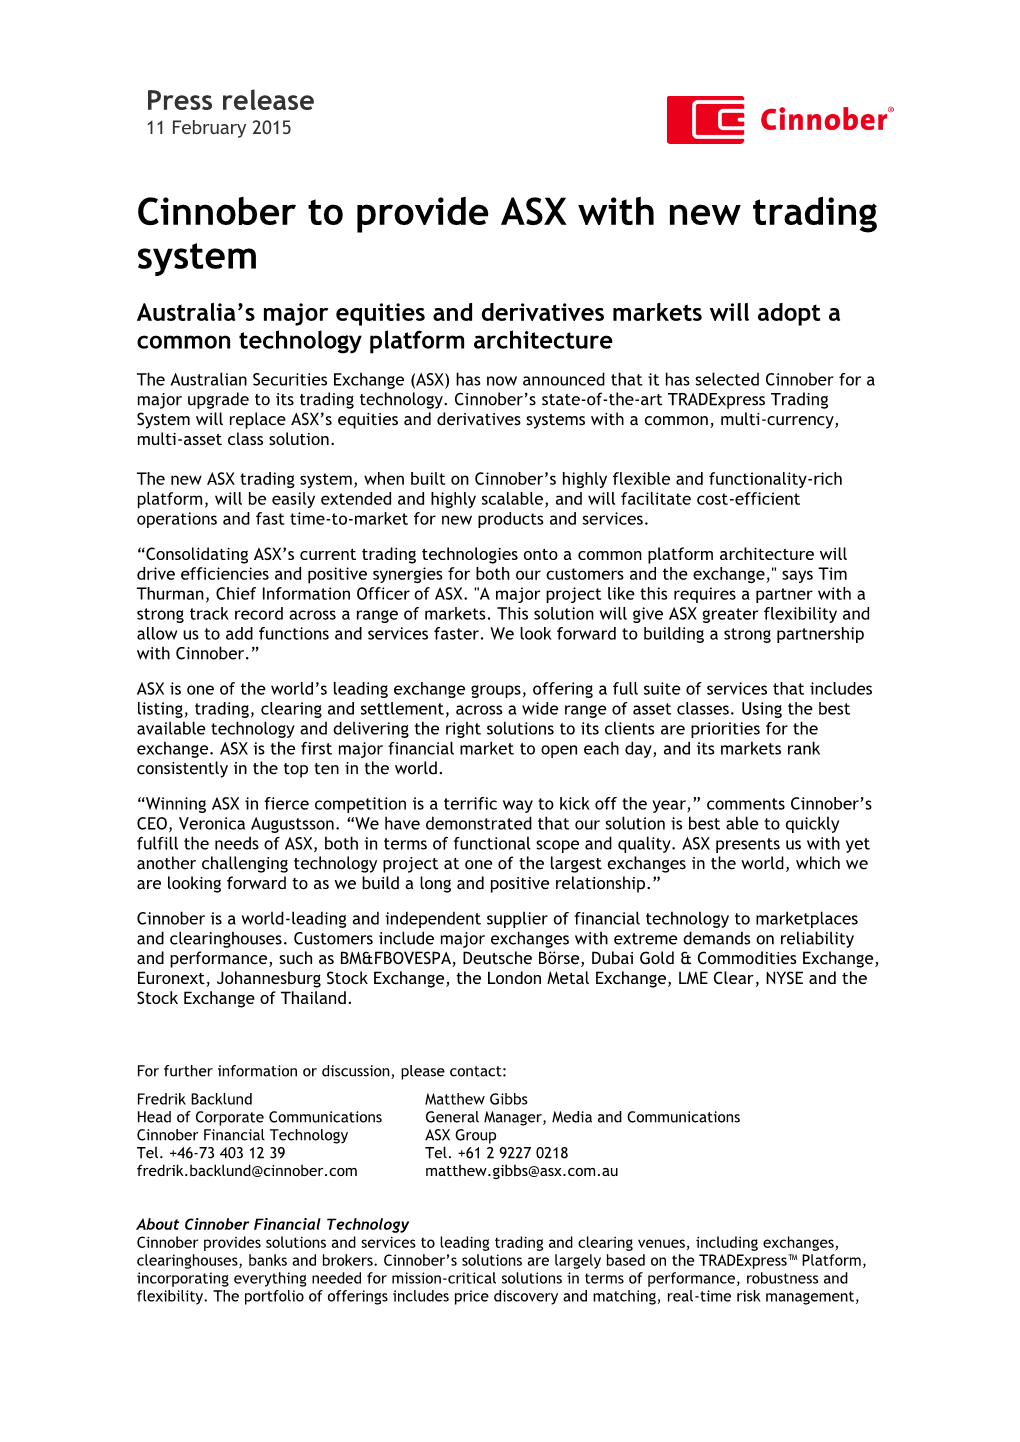 Cinnober to Provide ASX with New Trading System